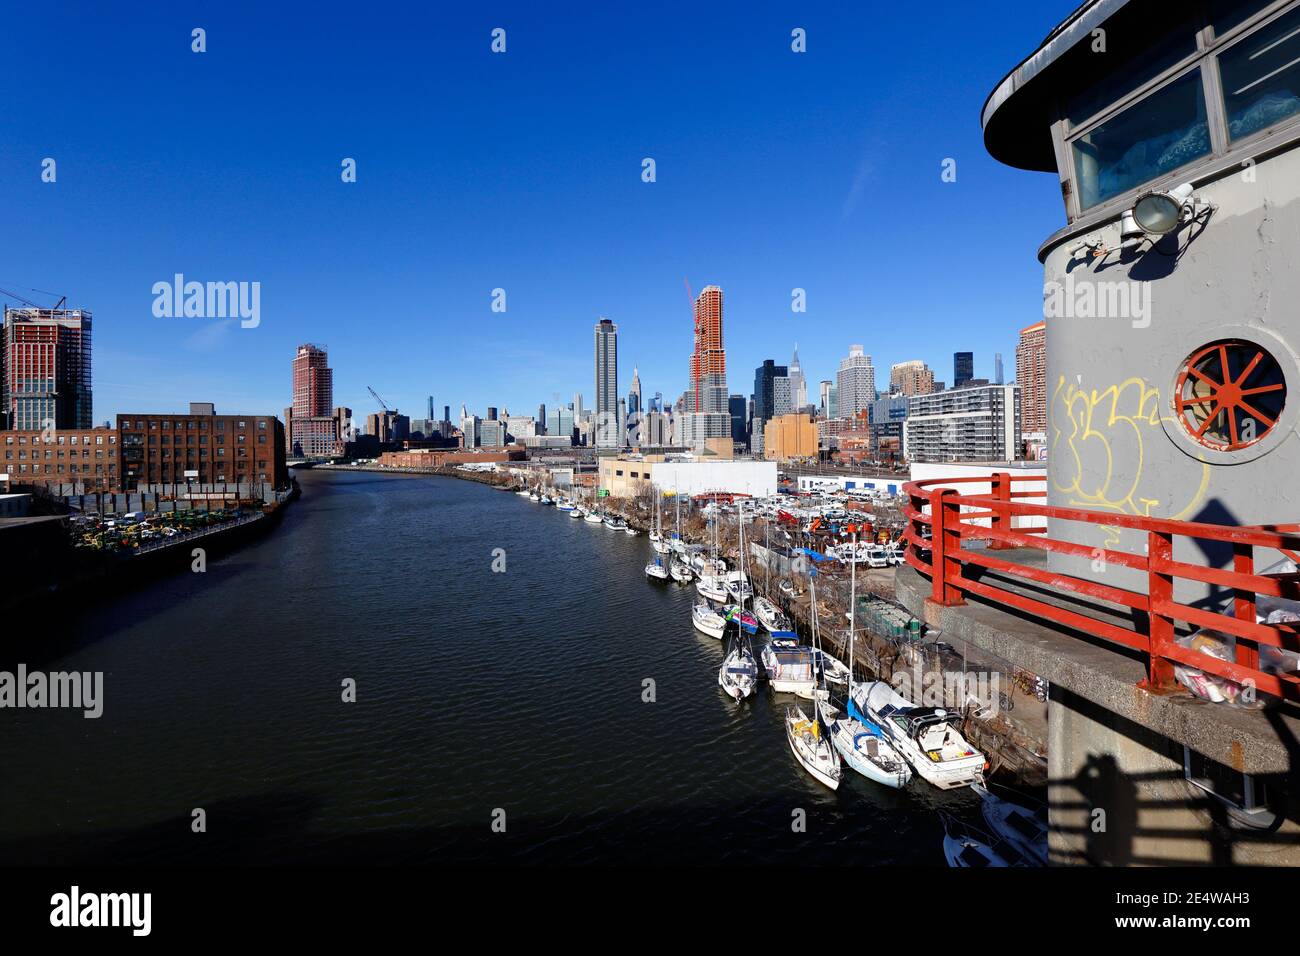 View of Newtown Creek from the Pulaski Bridge with Hunters Point, Long Island City, Greenpoint, and Midtown Manhattan in the background. Stock Photo